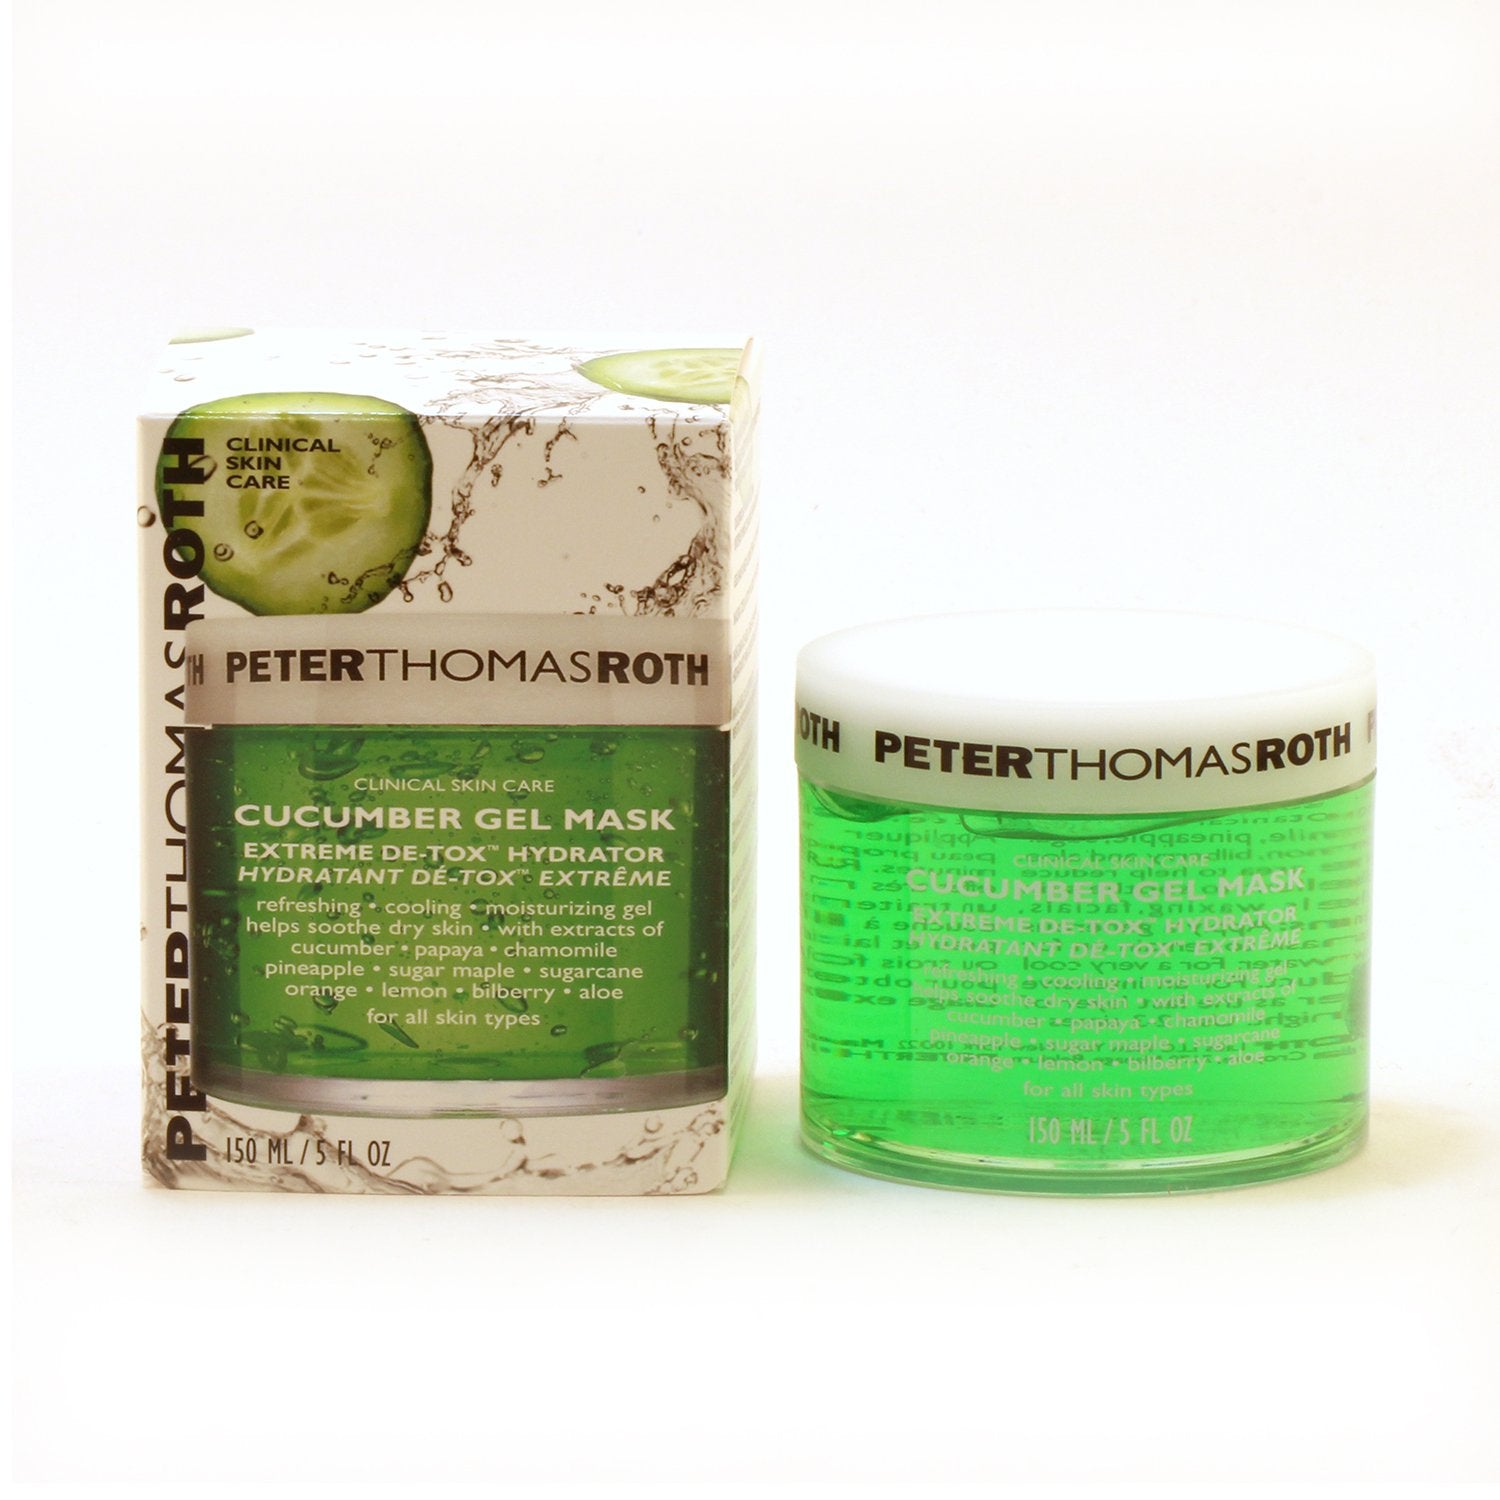 Skin Care - PETER THOMAS ROTH CUCUMBER GEL MASK EXTREME DE-TOX HYDRATOR, 5.3 OZ